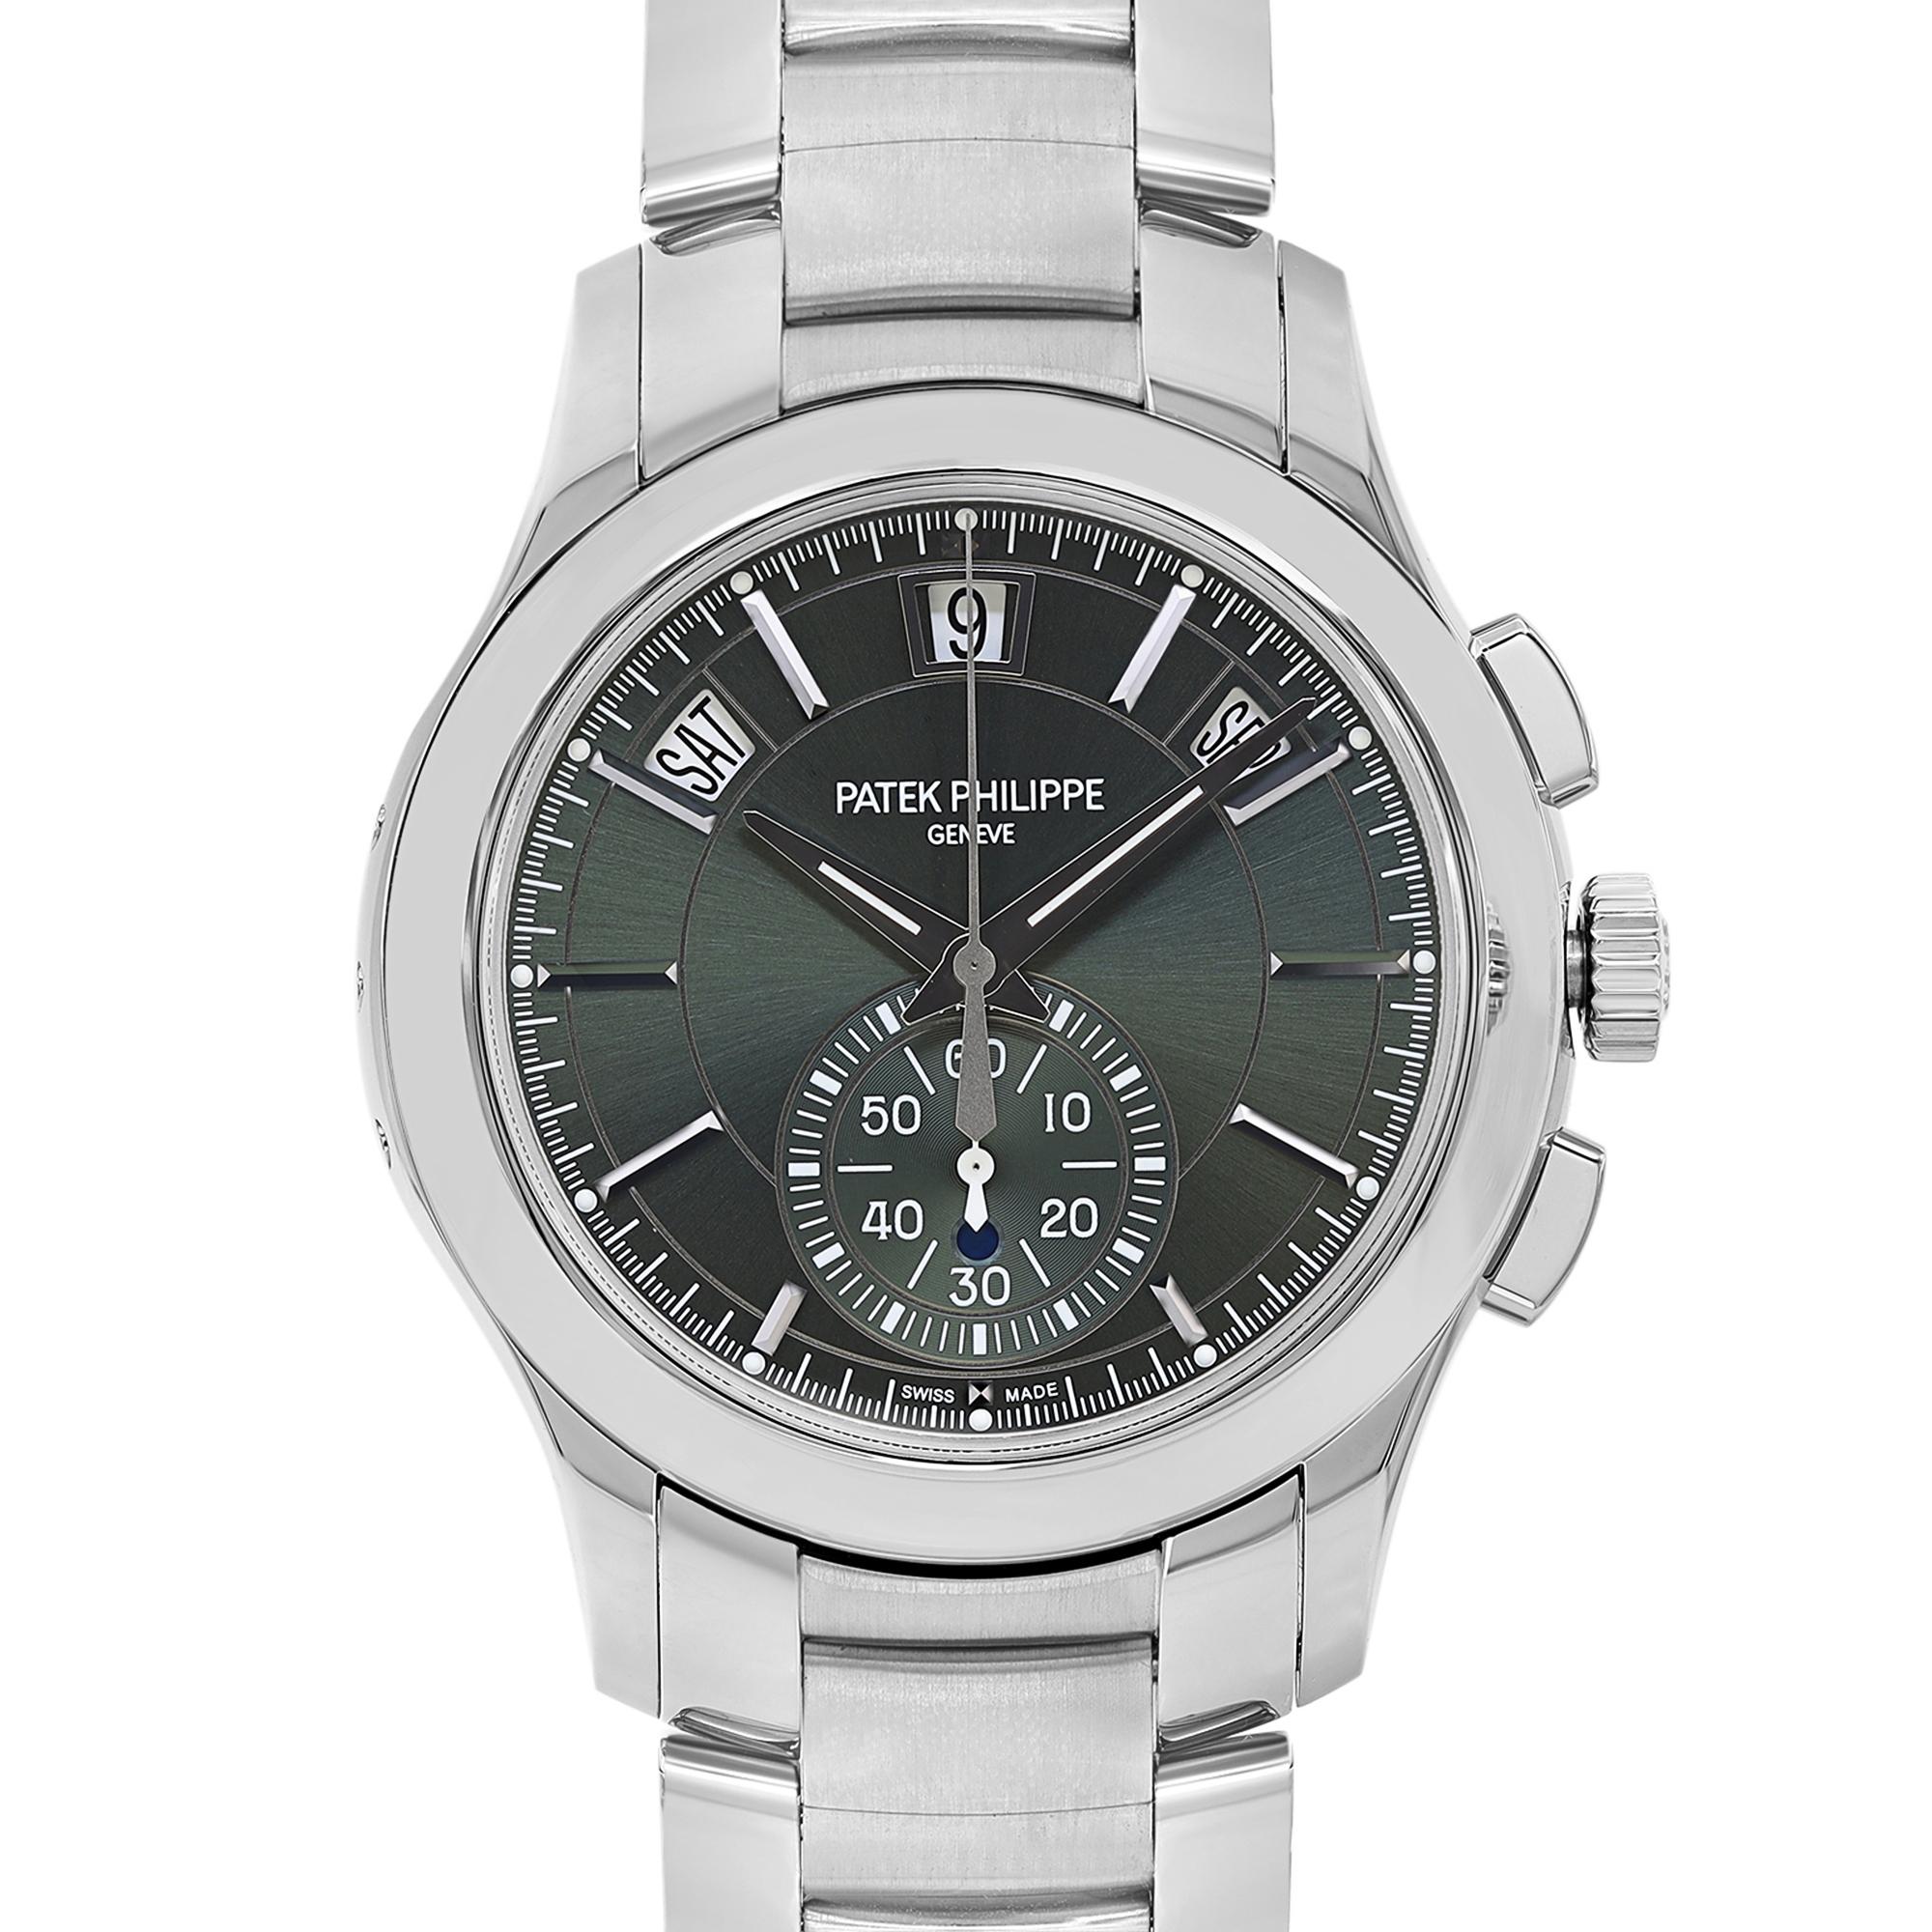 Unworn 2022 Patek Philippe Stainless Steel 42mm Green dial Men's Watch 5905-1A-001. This Beautiful Timepiece is Powered by Mechanical (Automatic) Movement And Features: Stainless steel case with a stainless steel bracelet. Fixed stainless steel